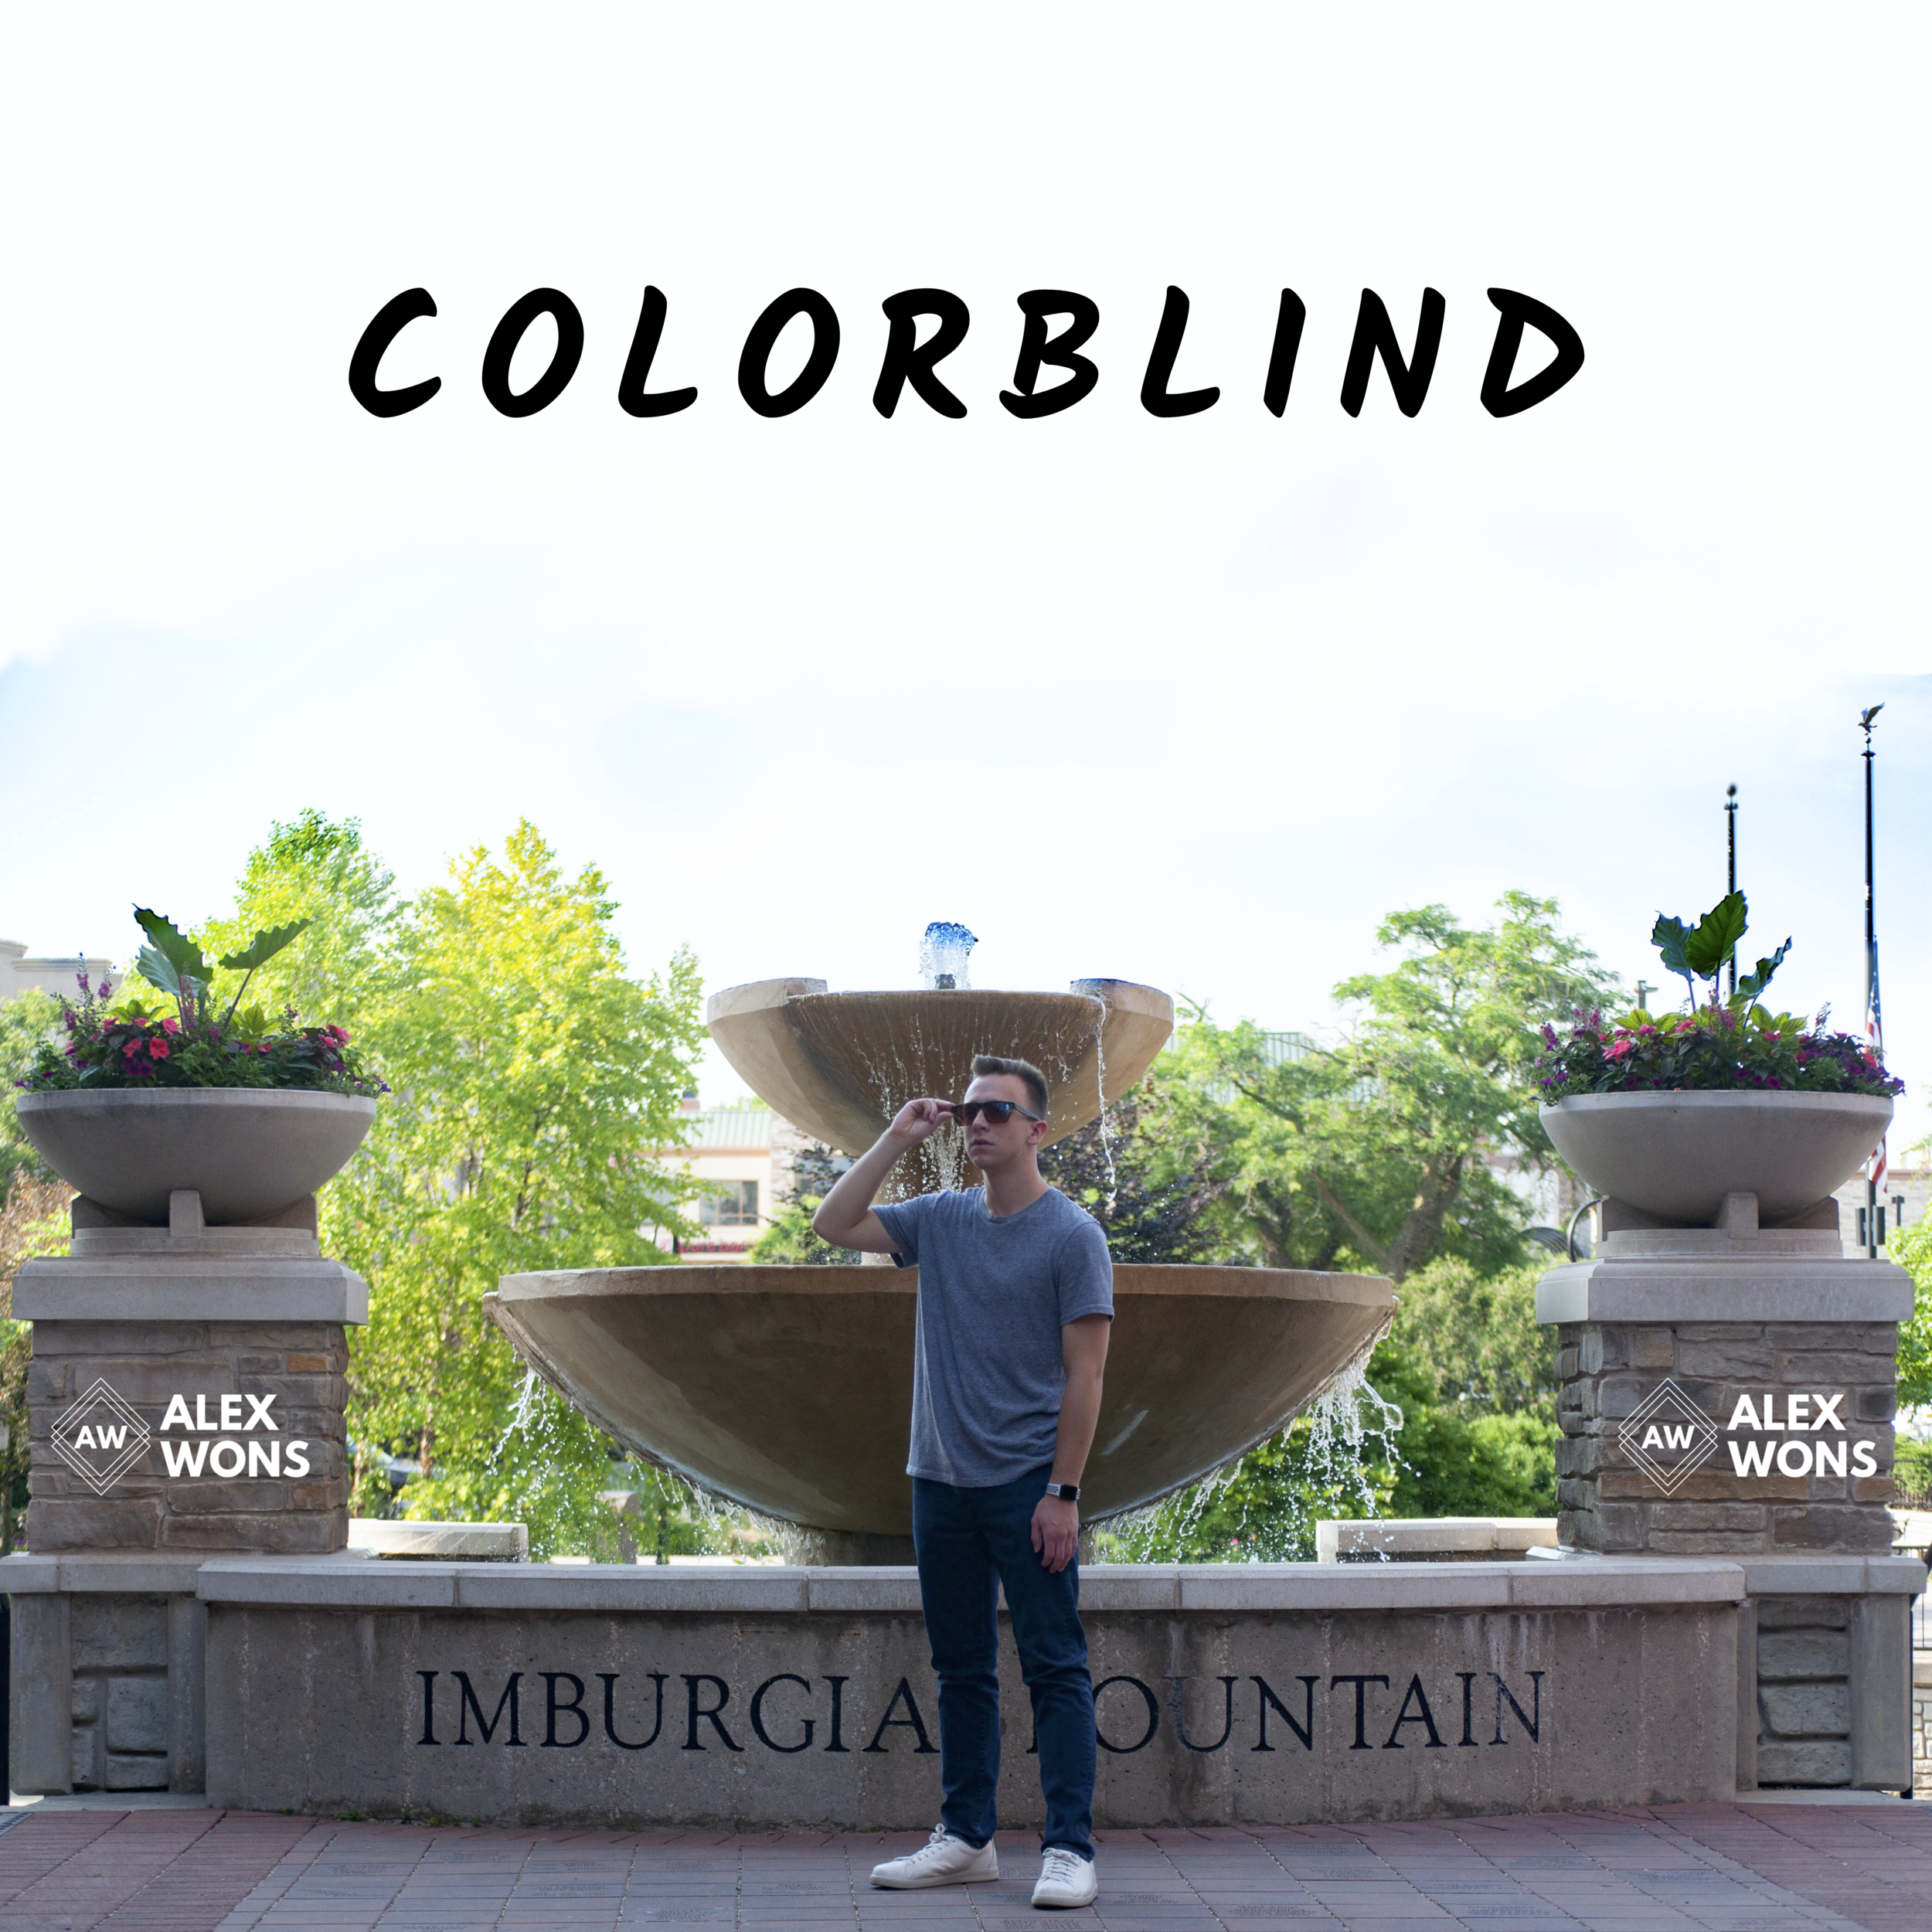 "Colorblind"